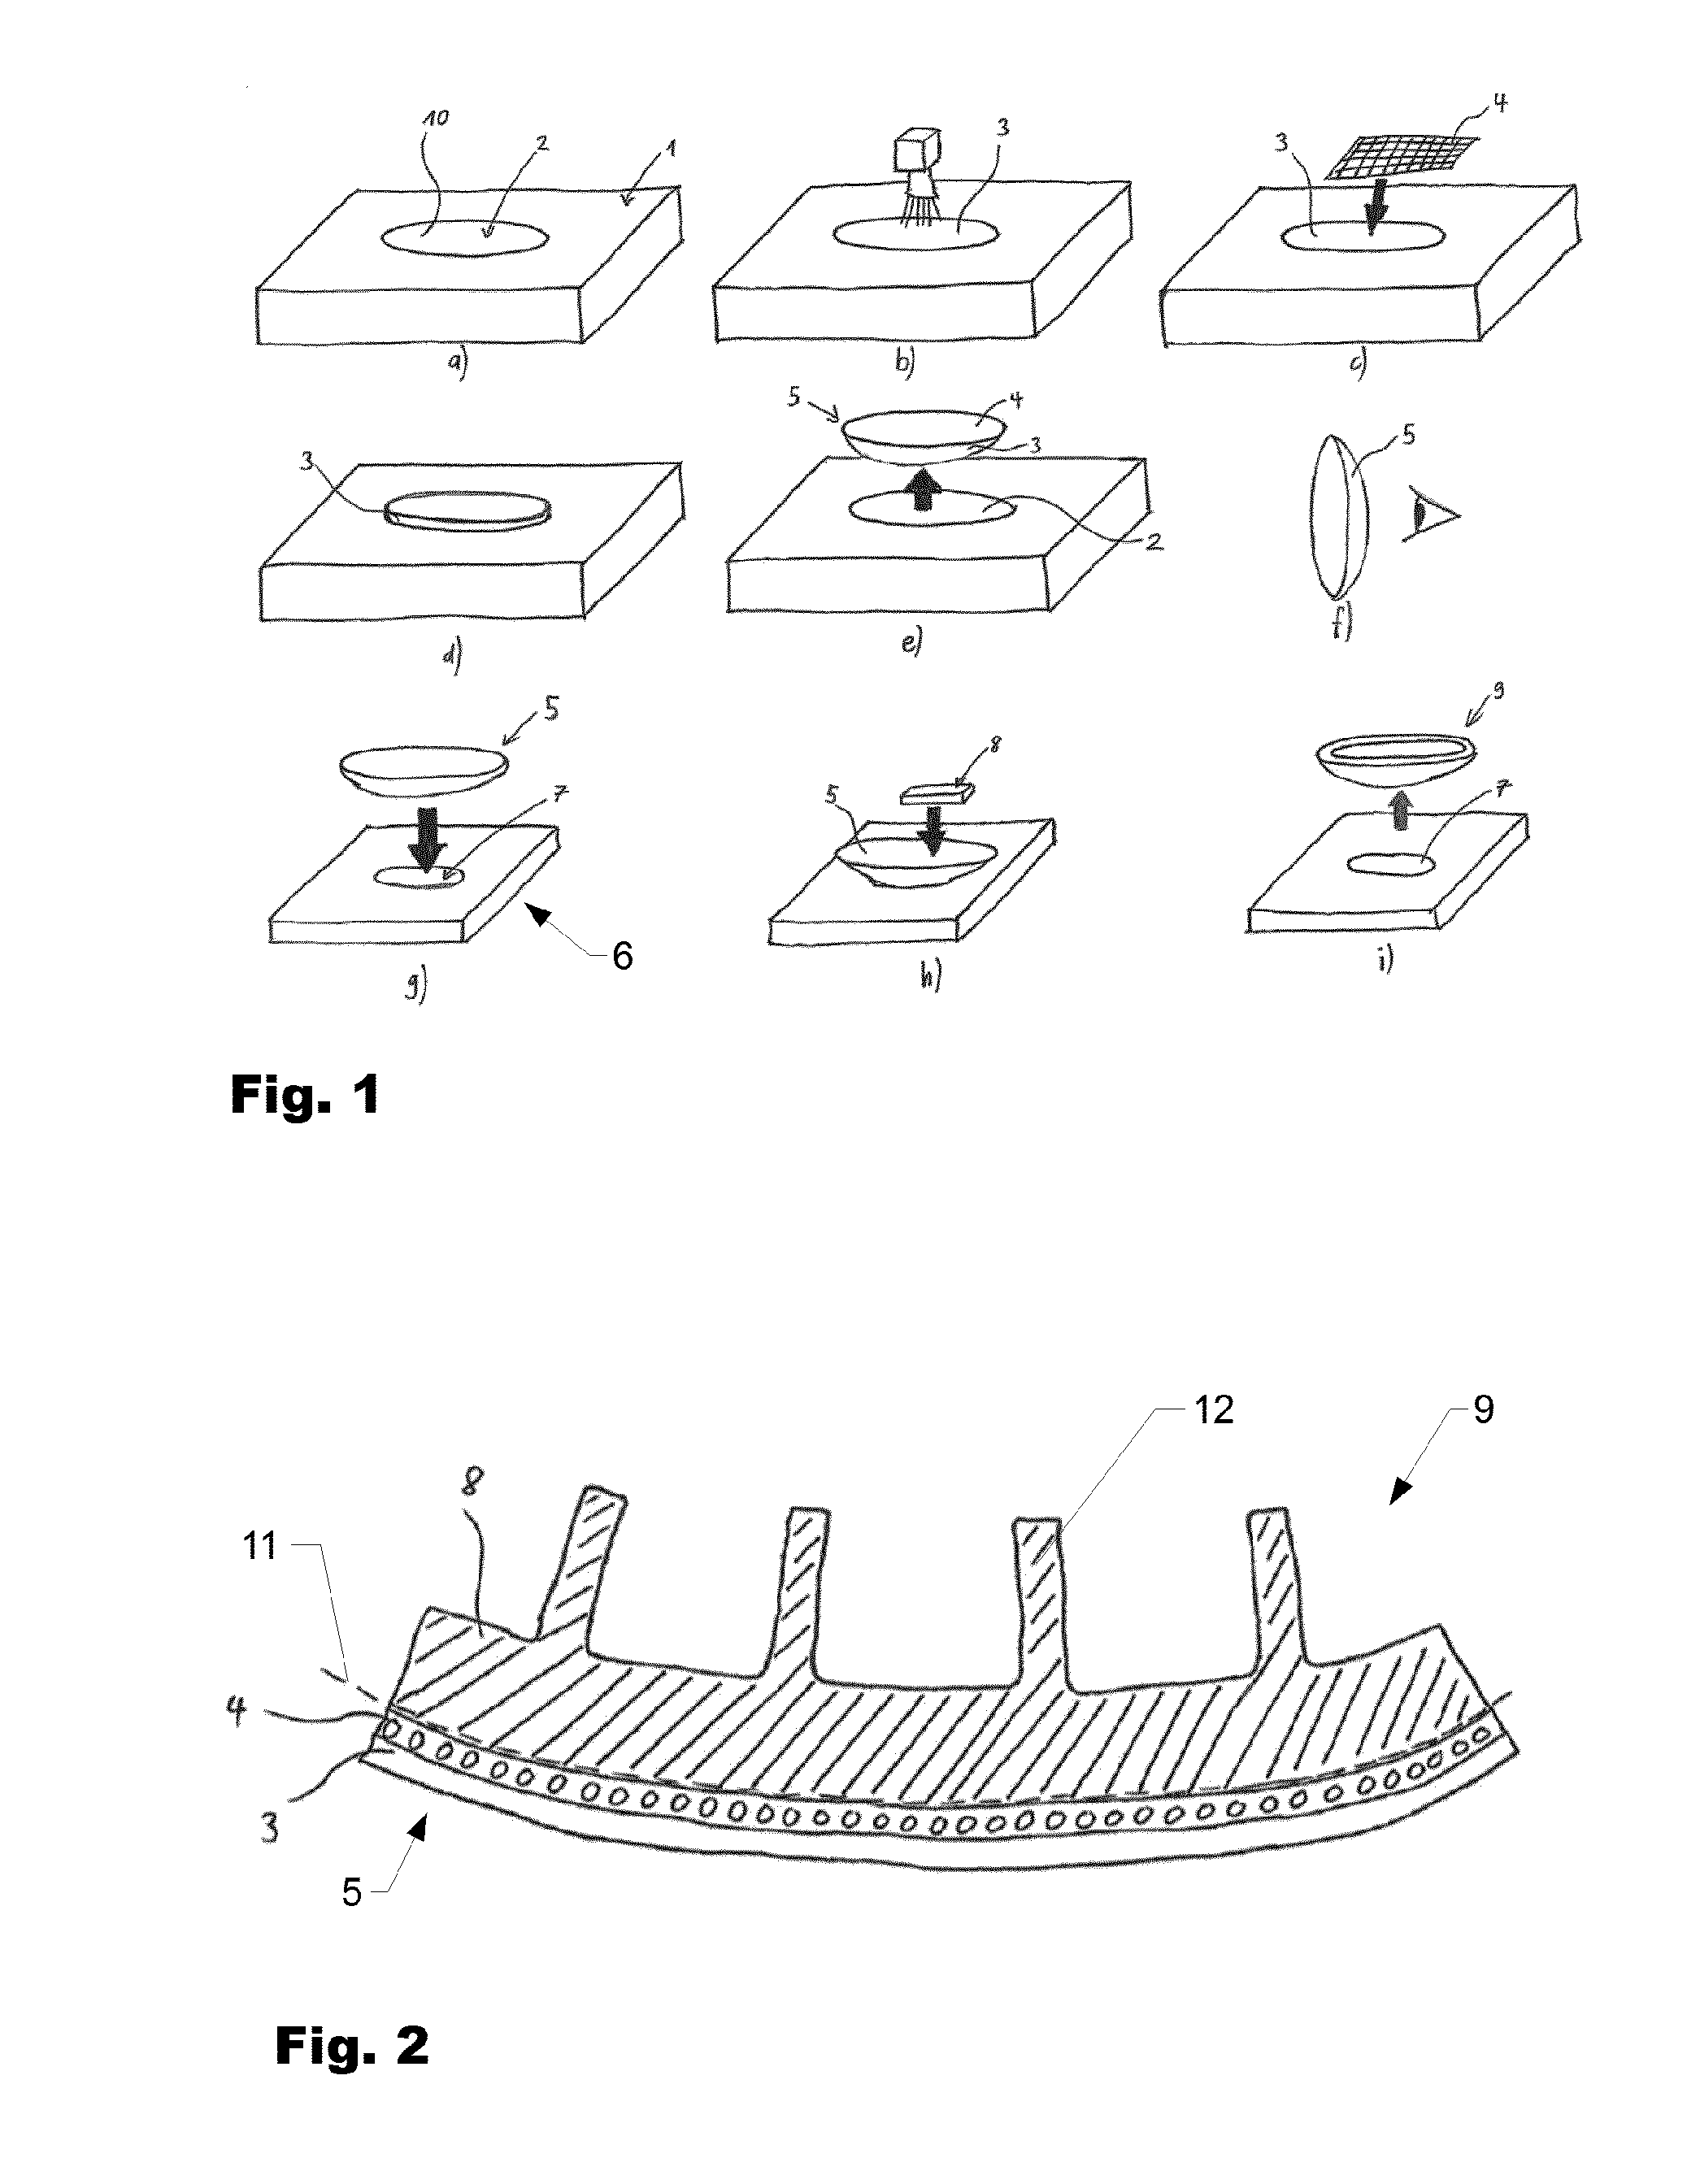 Method for producing components from fiber-reinforced composite material